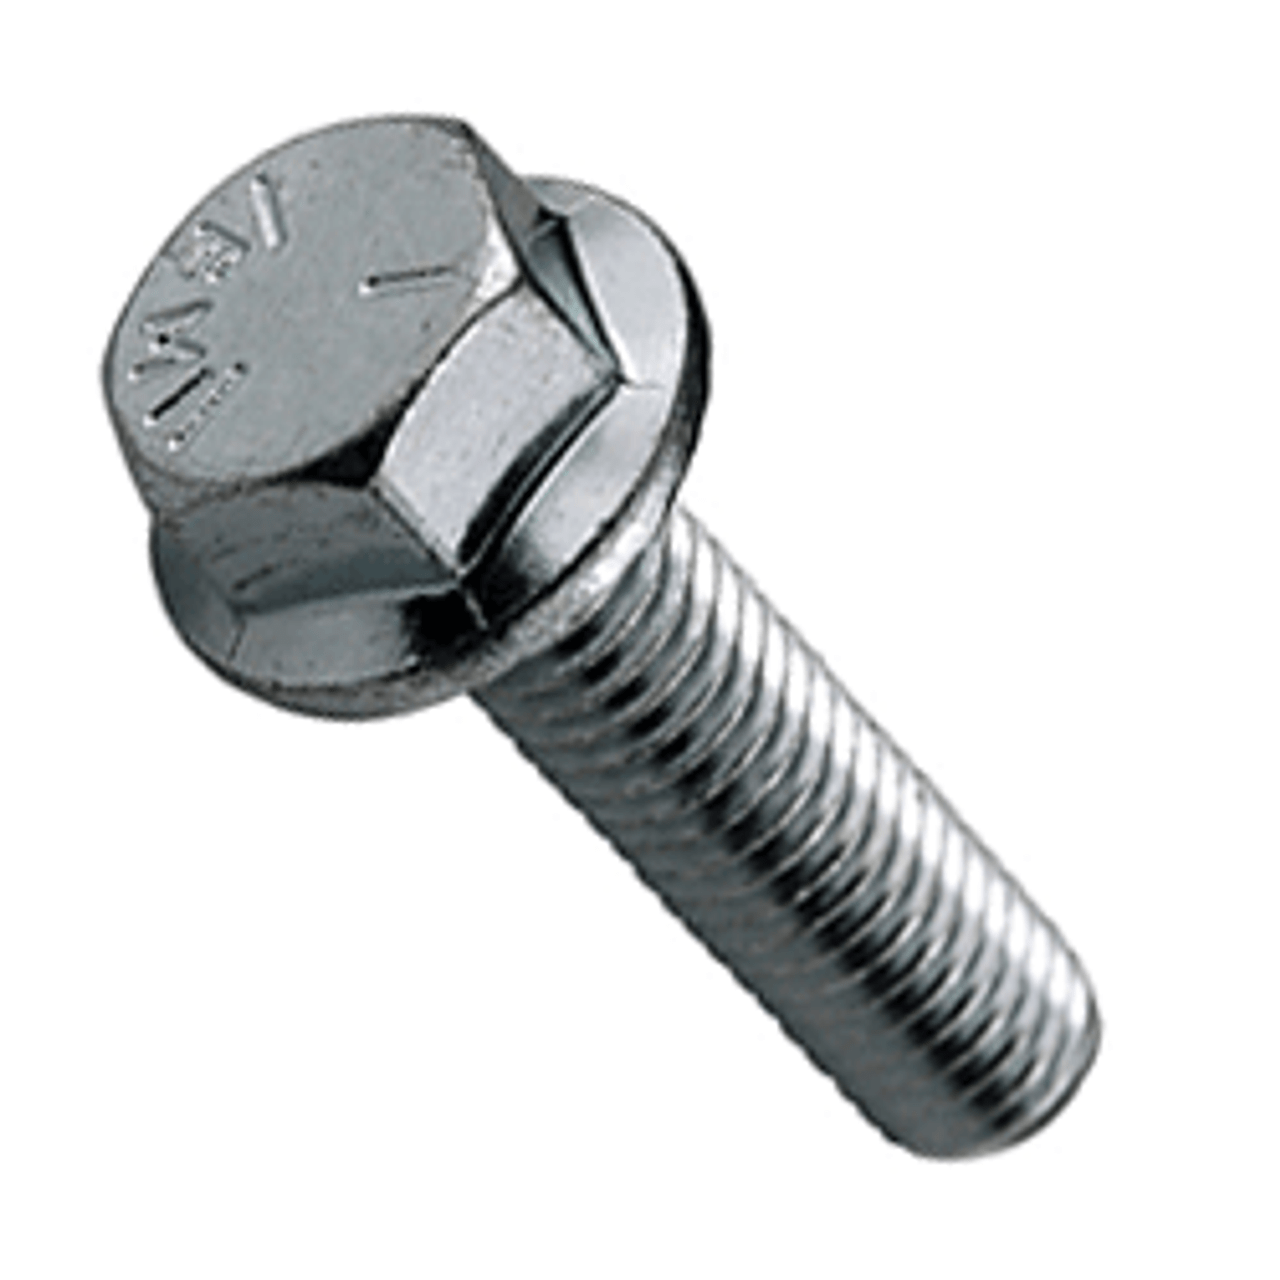 5/16-18x1-1/4 STAINLESS STEEL Serrated Hex Flange Screws Flange Bolts 5 